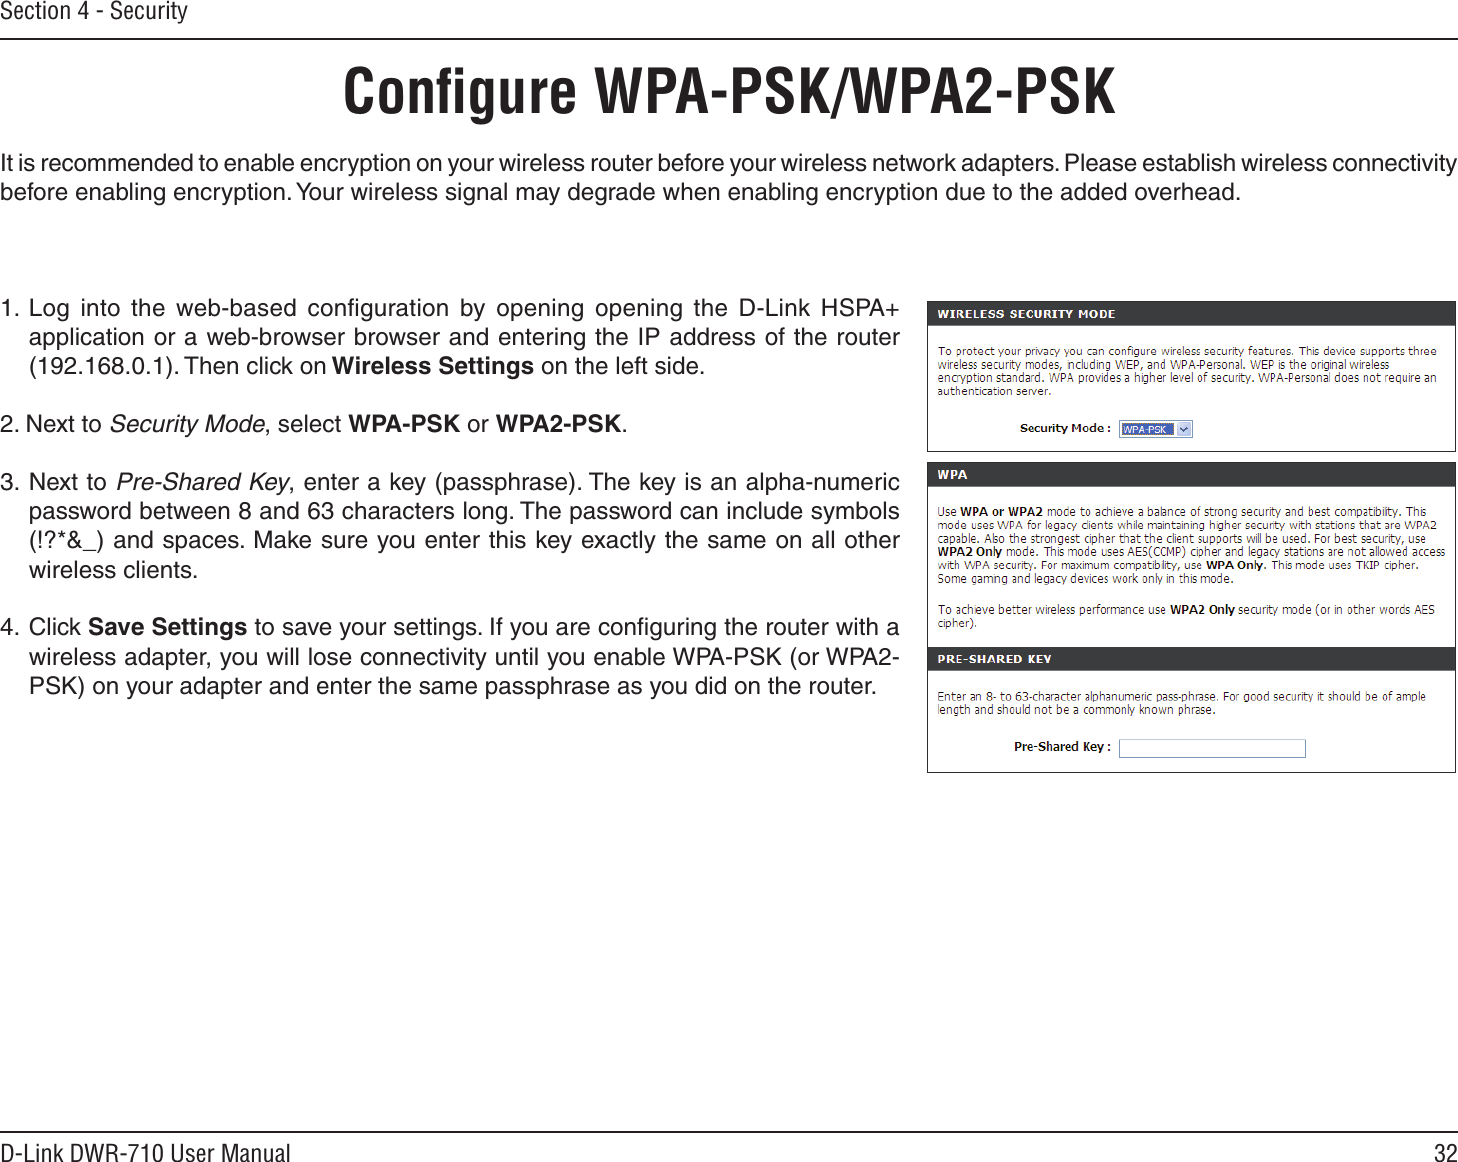 32D-Link DWR-710 User ManualSection 4 - SecurityConﬁgure WPA-PSK/WPA2-PSKIt is recommended to enable encryption on your wireless router before your wireless network adapters. Please establish wireless connectivity before enabling encryption. Your wireless signal may degrade when enabling encryption due to the added overhead.1. Log  into  the  web-based  conﬁguration  by  opening  opening  the  D-Link  HSPA+ application or a web-browser browser and entering the IP address of the router (192.168.0.1). Then click on Wireless Settings on the left side.2. Next to Security Mode, select WPA-PSK or WPA2-PSK.3.  Next to Pre-Shared Key, enter a key (passphrase). The key is an alpha-numeric password between 8 and 63 characters long. The password can include symbols (!?*&amp;_) and spaces. Make sure you enter this key exactly the same on all other wireless clients.4.  Click Save Settings to save your settings. If you are conﬁguring the router with a wireless adapter, you will lose connectivity until you enable WPA-PSK (or WPA2-PSK) on your adapter and enter the same passphrase as you did on the router.